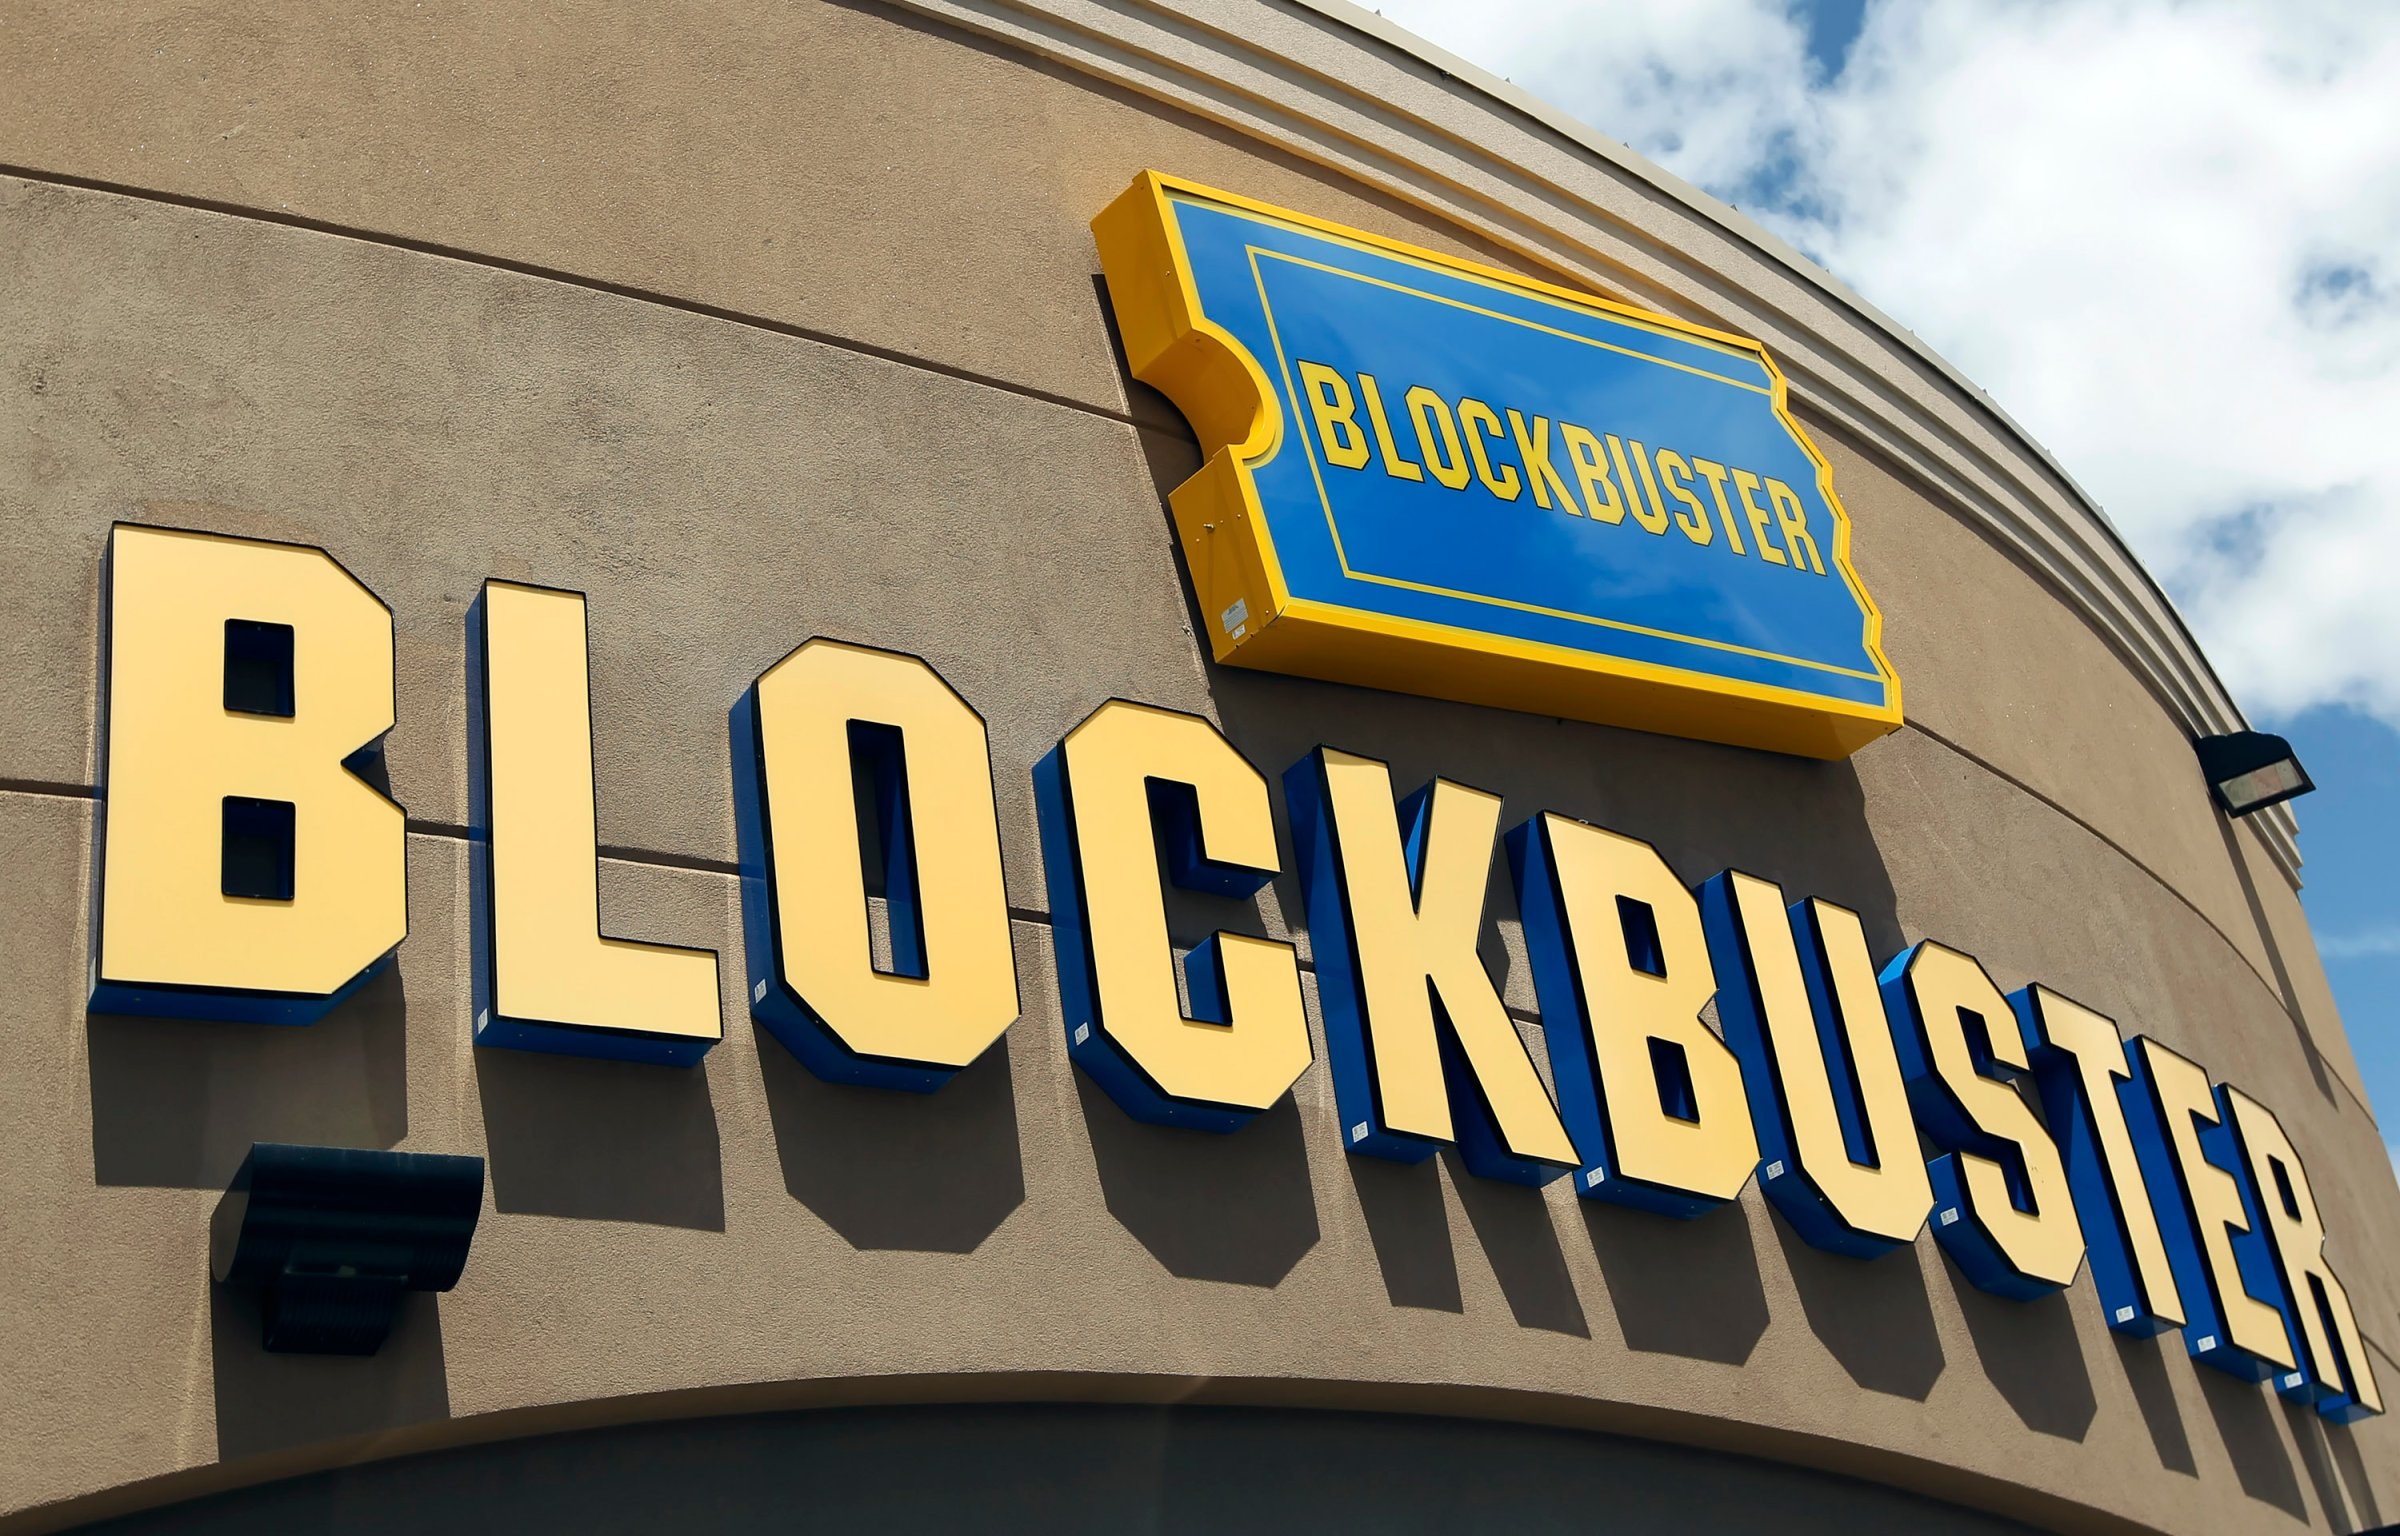 Signage hangs outside a Blockbuster store in Salt Lake City, Utah, U.S., on Wednesday, May 12, 2010.